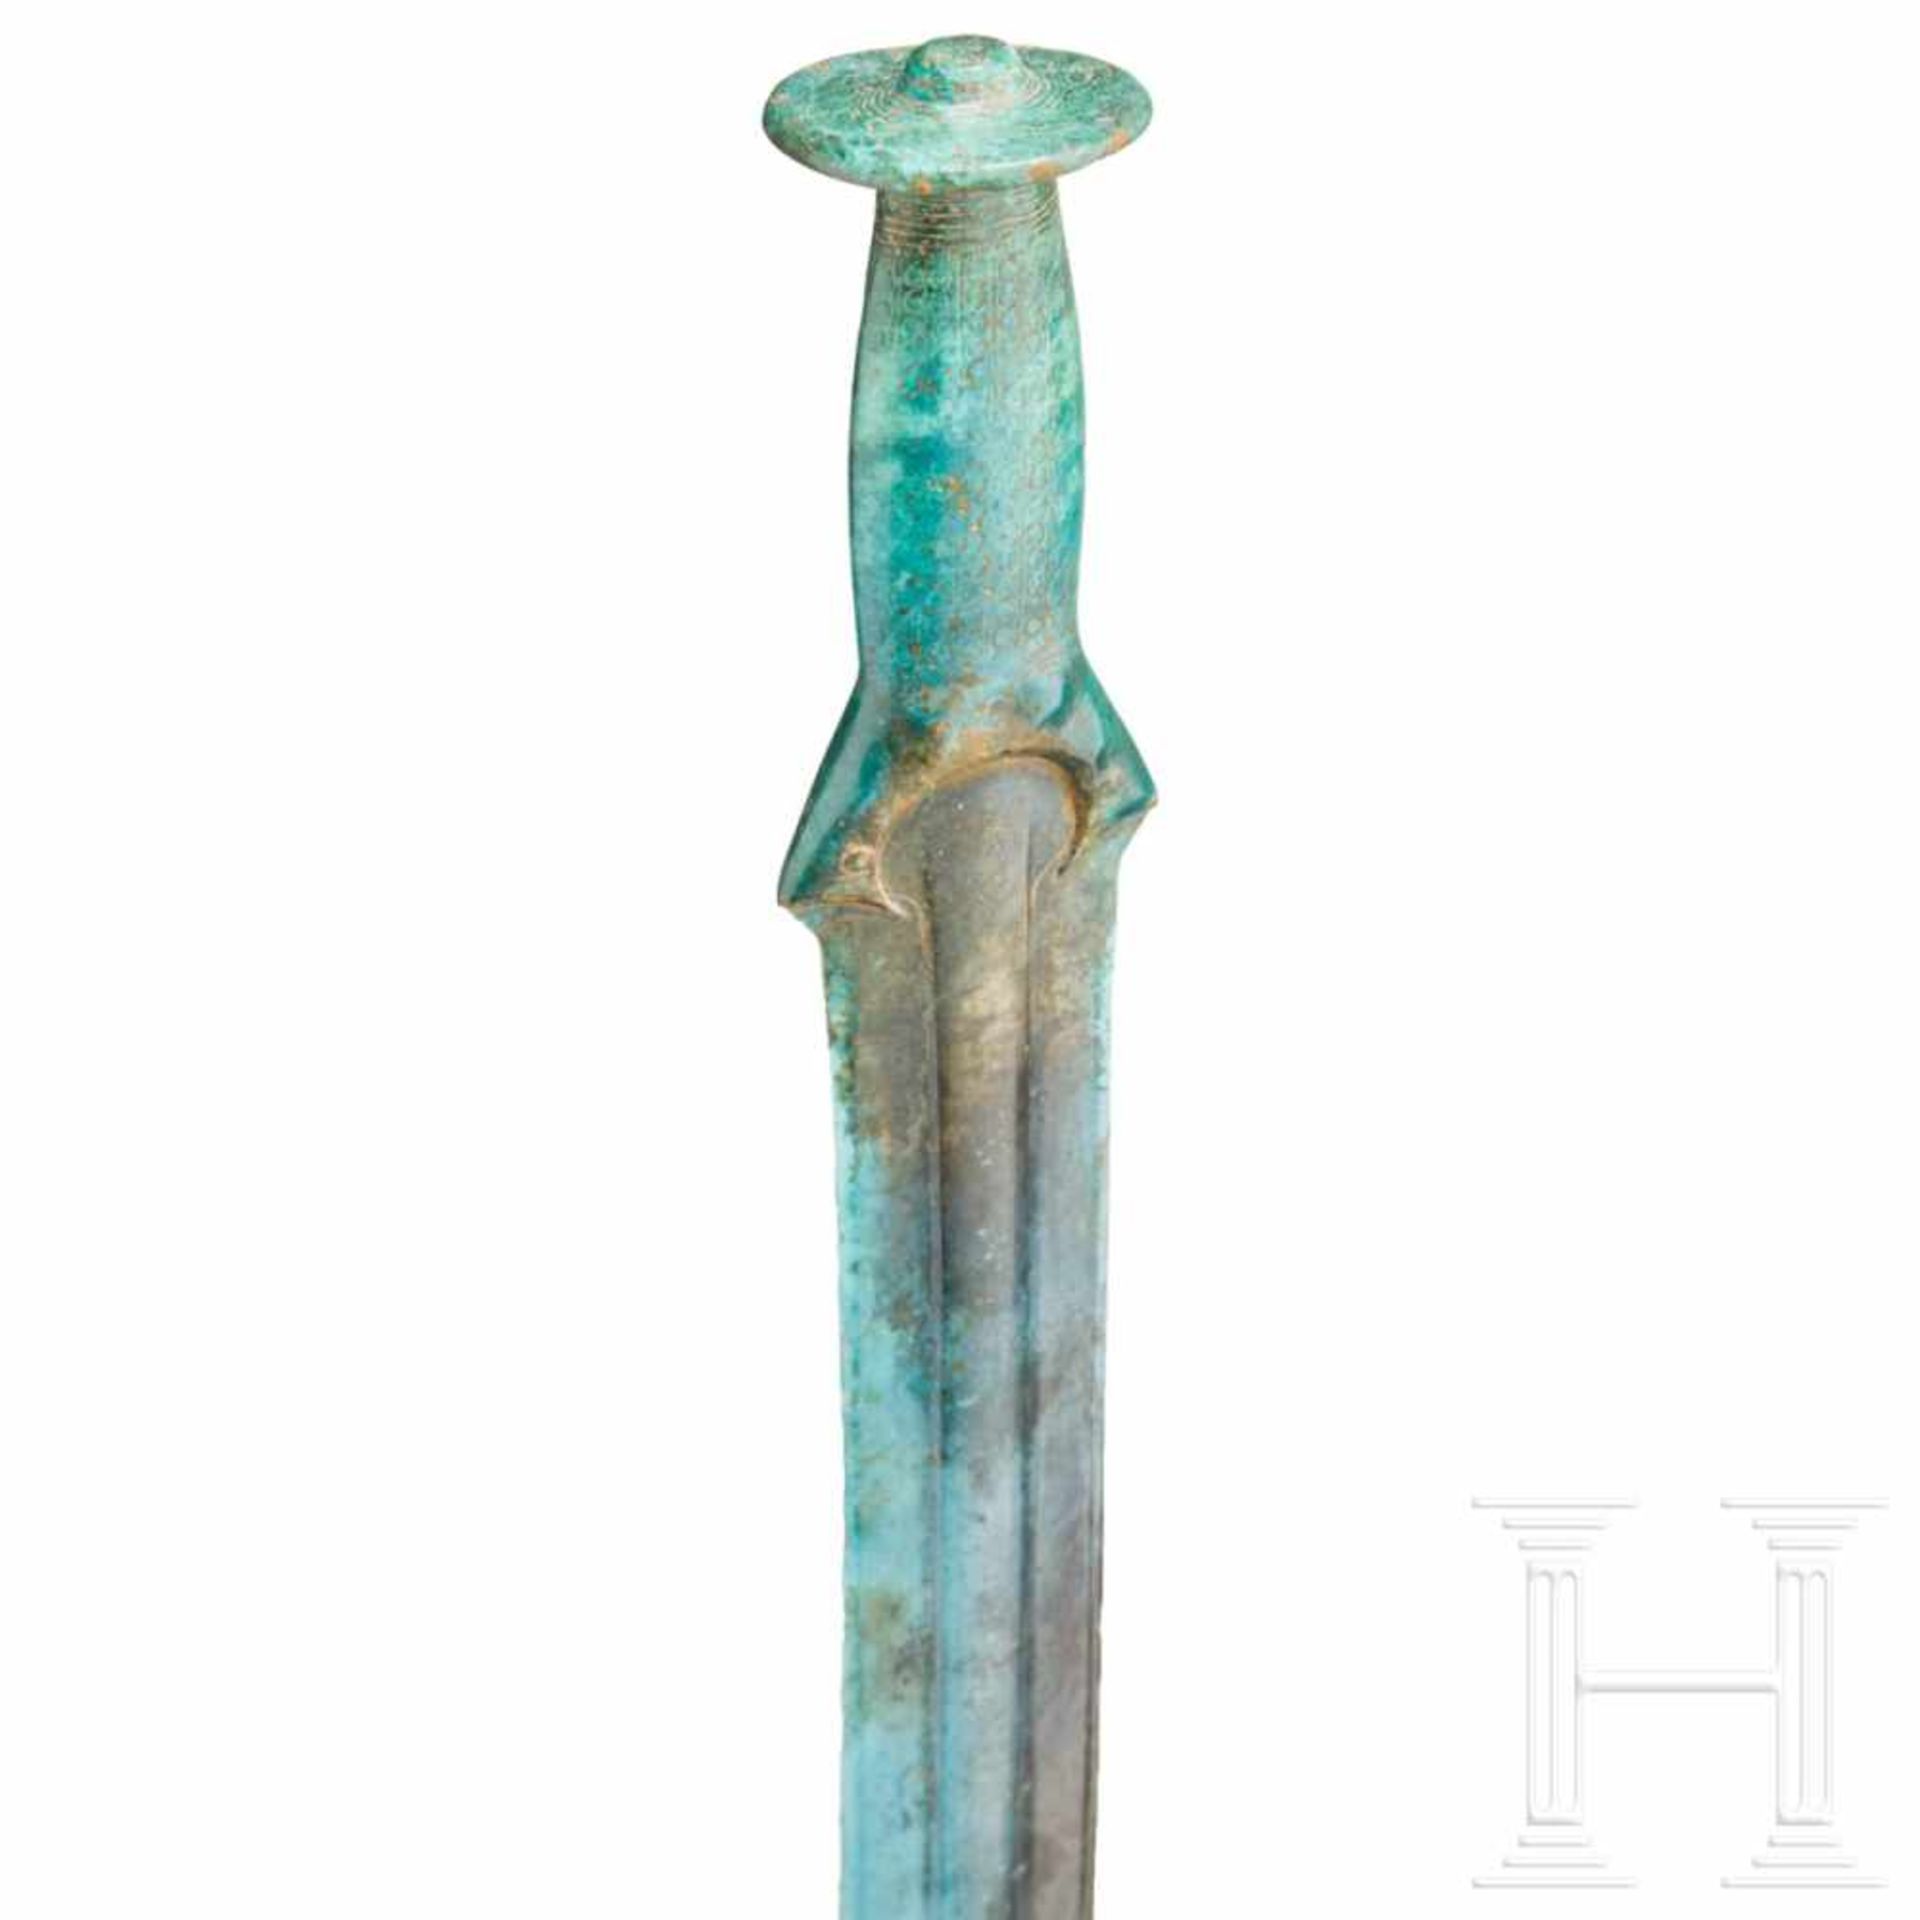 A German bronze sword of the Riegsee type, 1300 – 1200 B.C.A beautifully preserved bronze sword with - Bild 6 aus 8